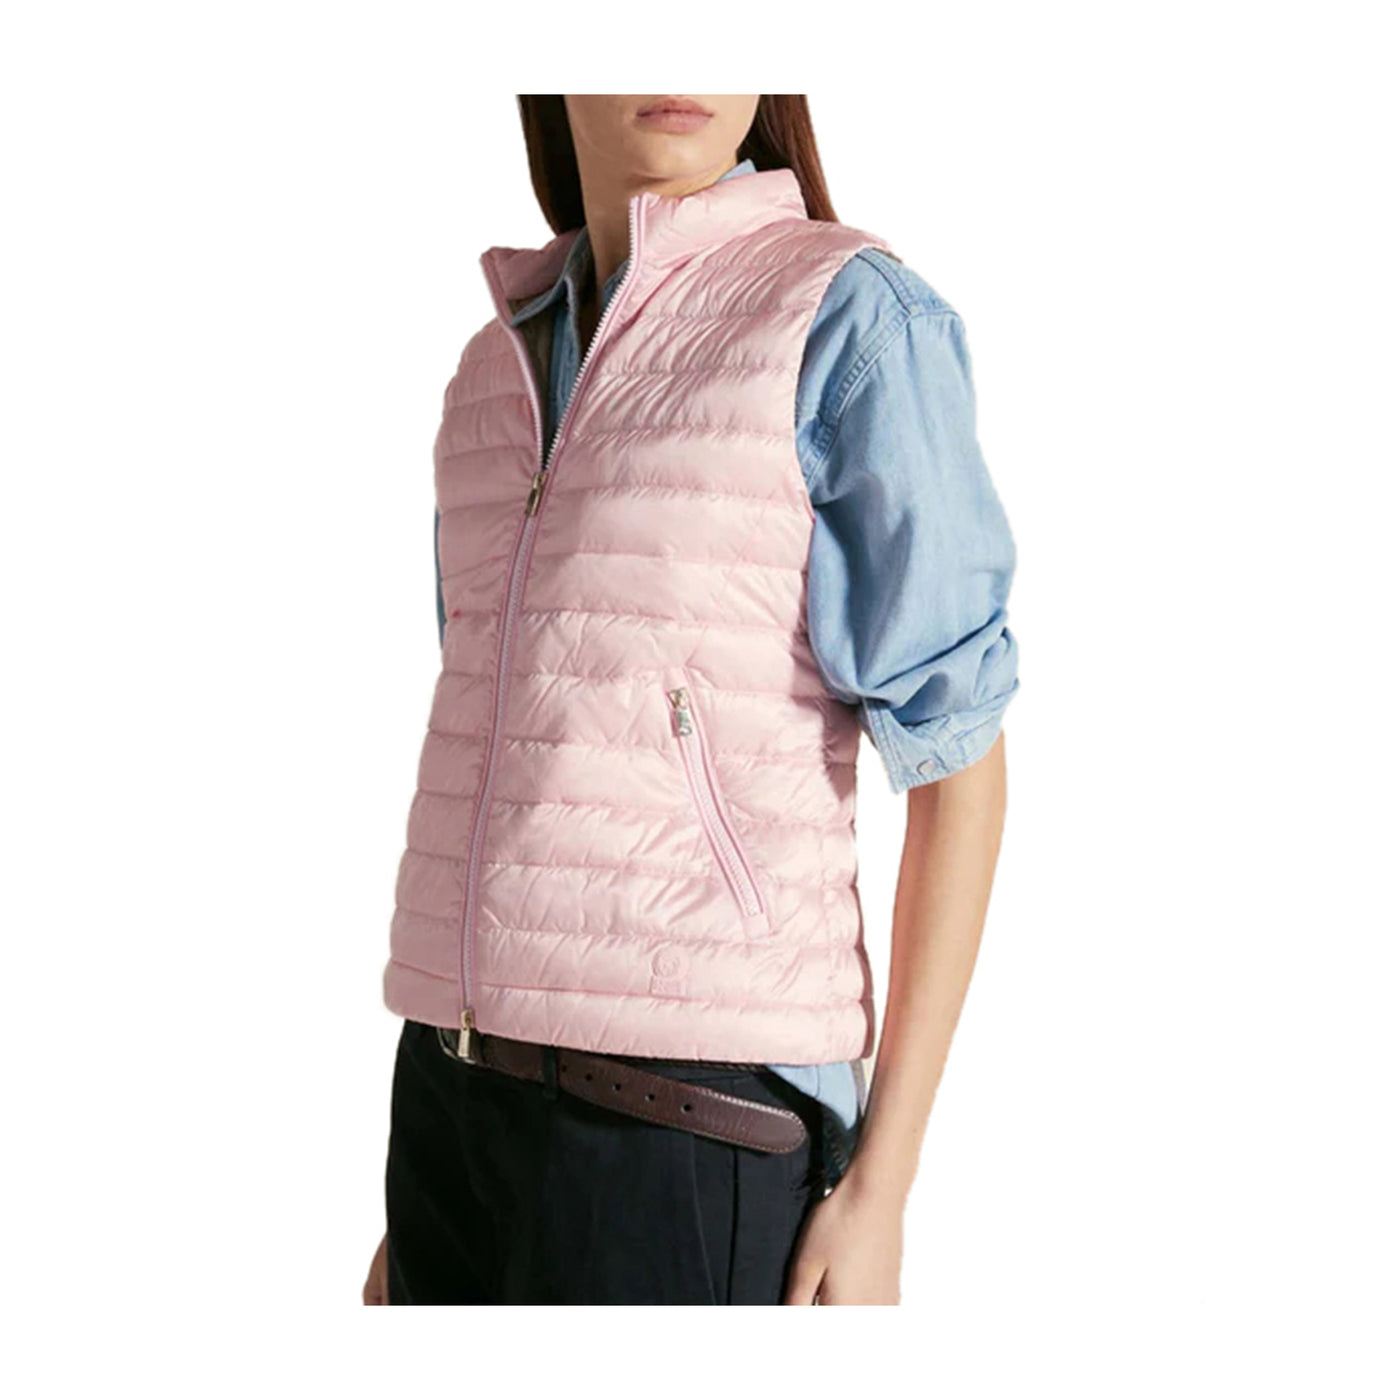 Women's vest with matching logo